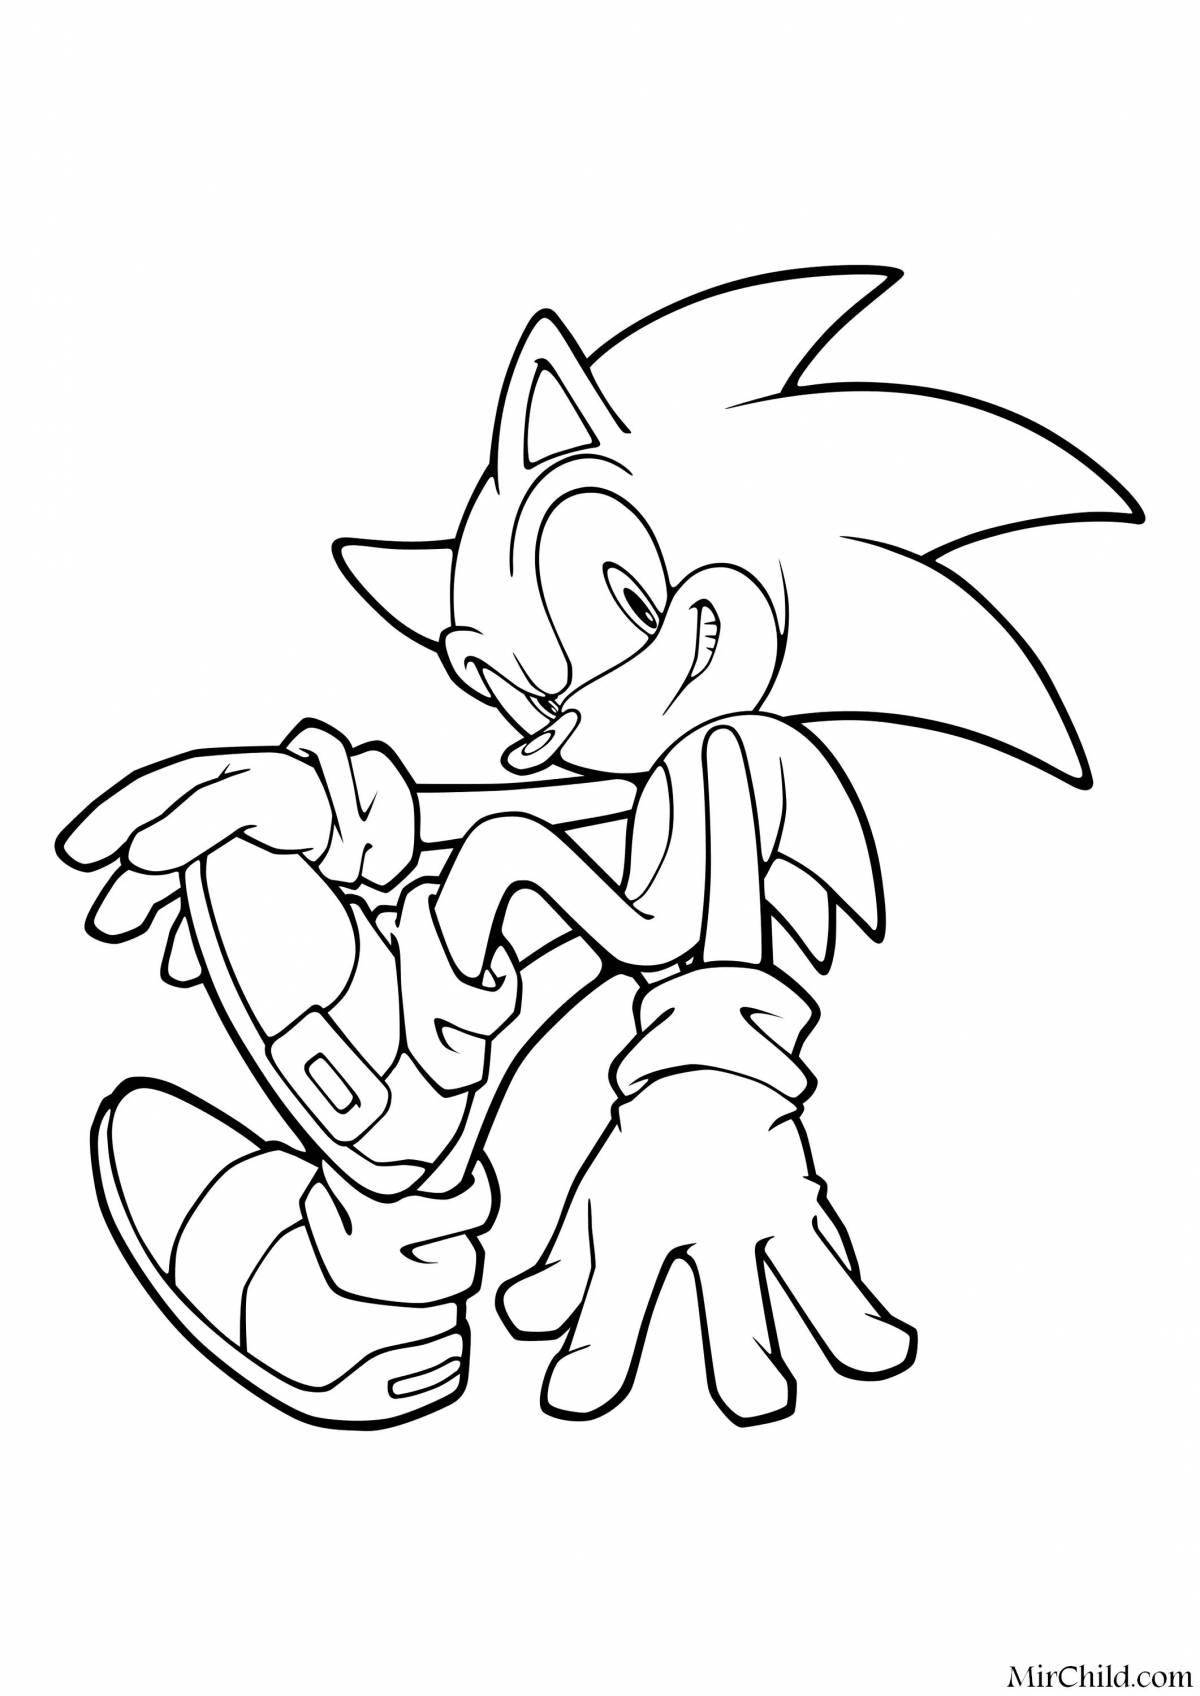 Super sonic.exe live coloring